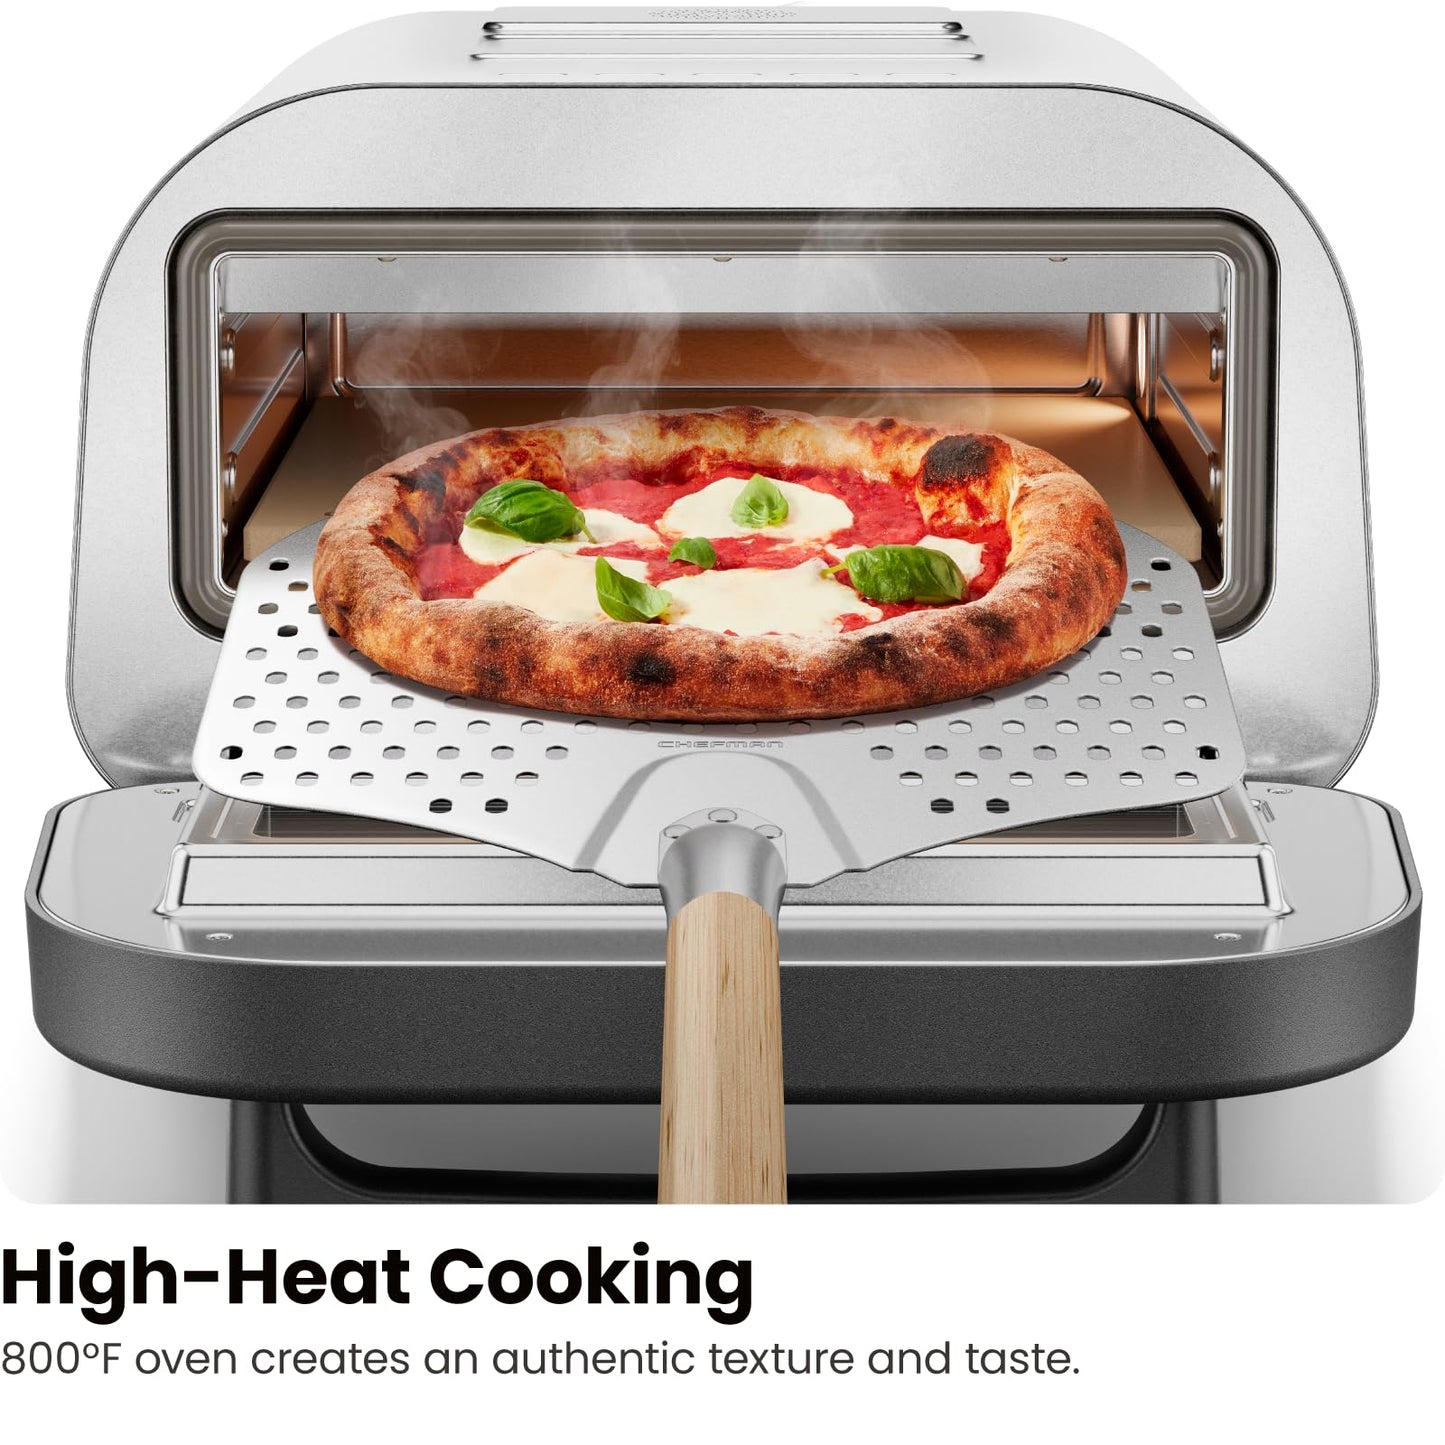 CHEFMAN Indoor Pizza Oven - Makes 12 Inch Pizzas in Minutes, Heats up to 800°F - Countertop Electric Pizza Maker with 5 Touchscreen Presets, Pizza Stone and Peel Included - Stainless Steel